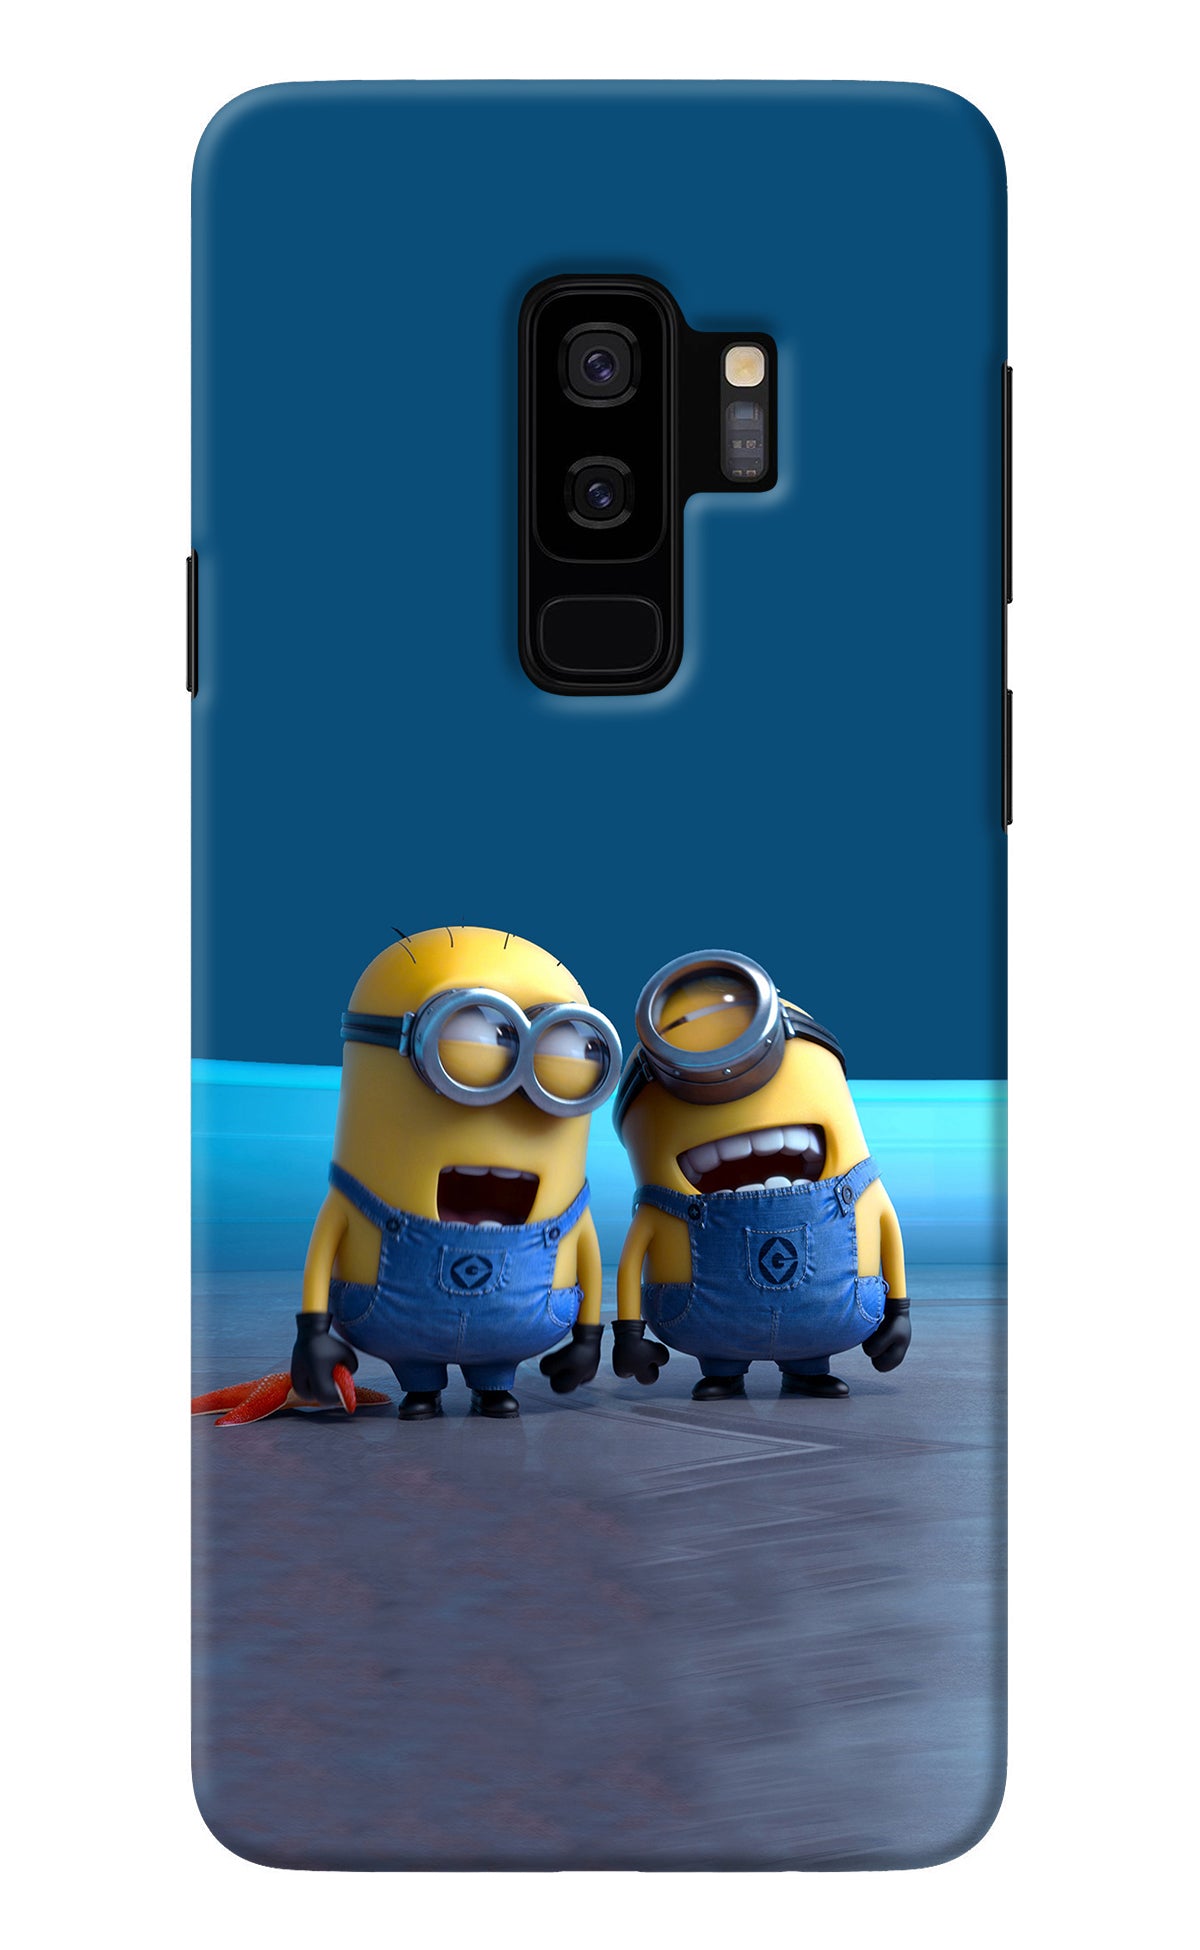 Minion Laughing Samsung S9 Plus Back Cover